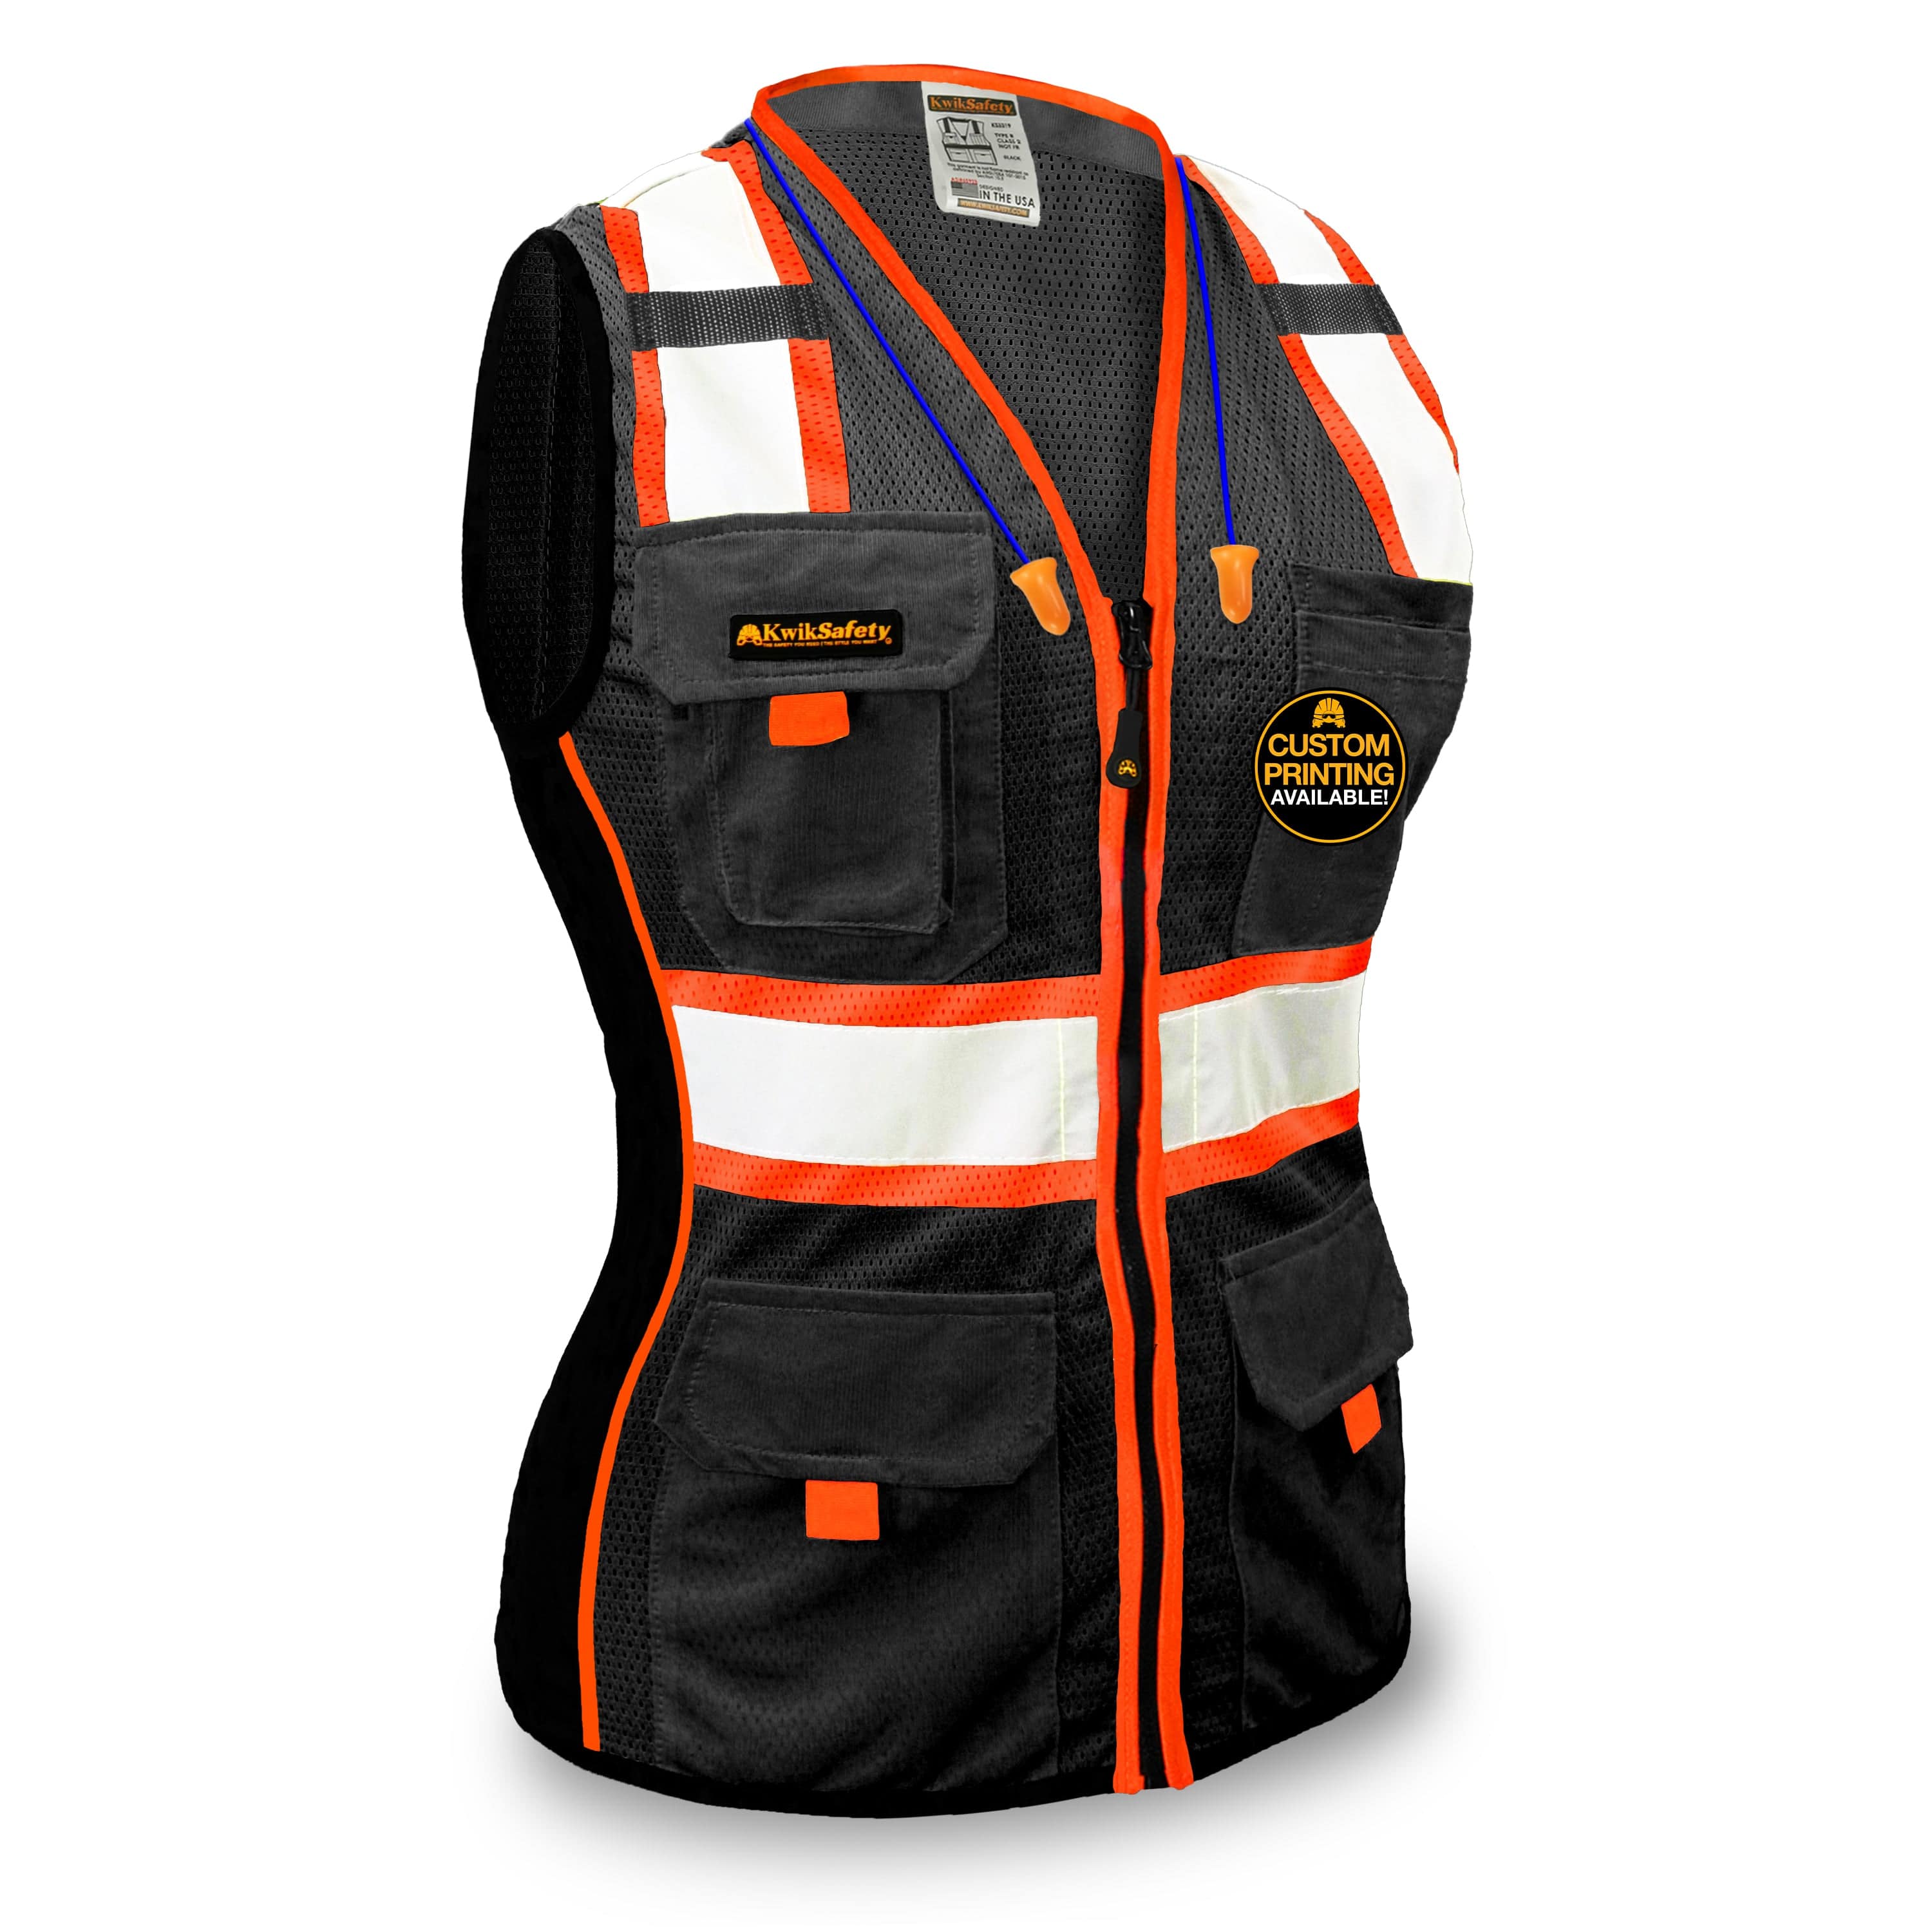 KwikSafety BLACK WIDOW Safety Vest for Women (SNUG-FIT) 9 Pockets Premium  ANSI Class Unrated Slim Fitted Work Gear - Model No.: KS3319BW